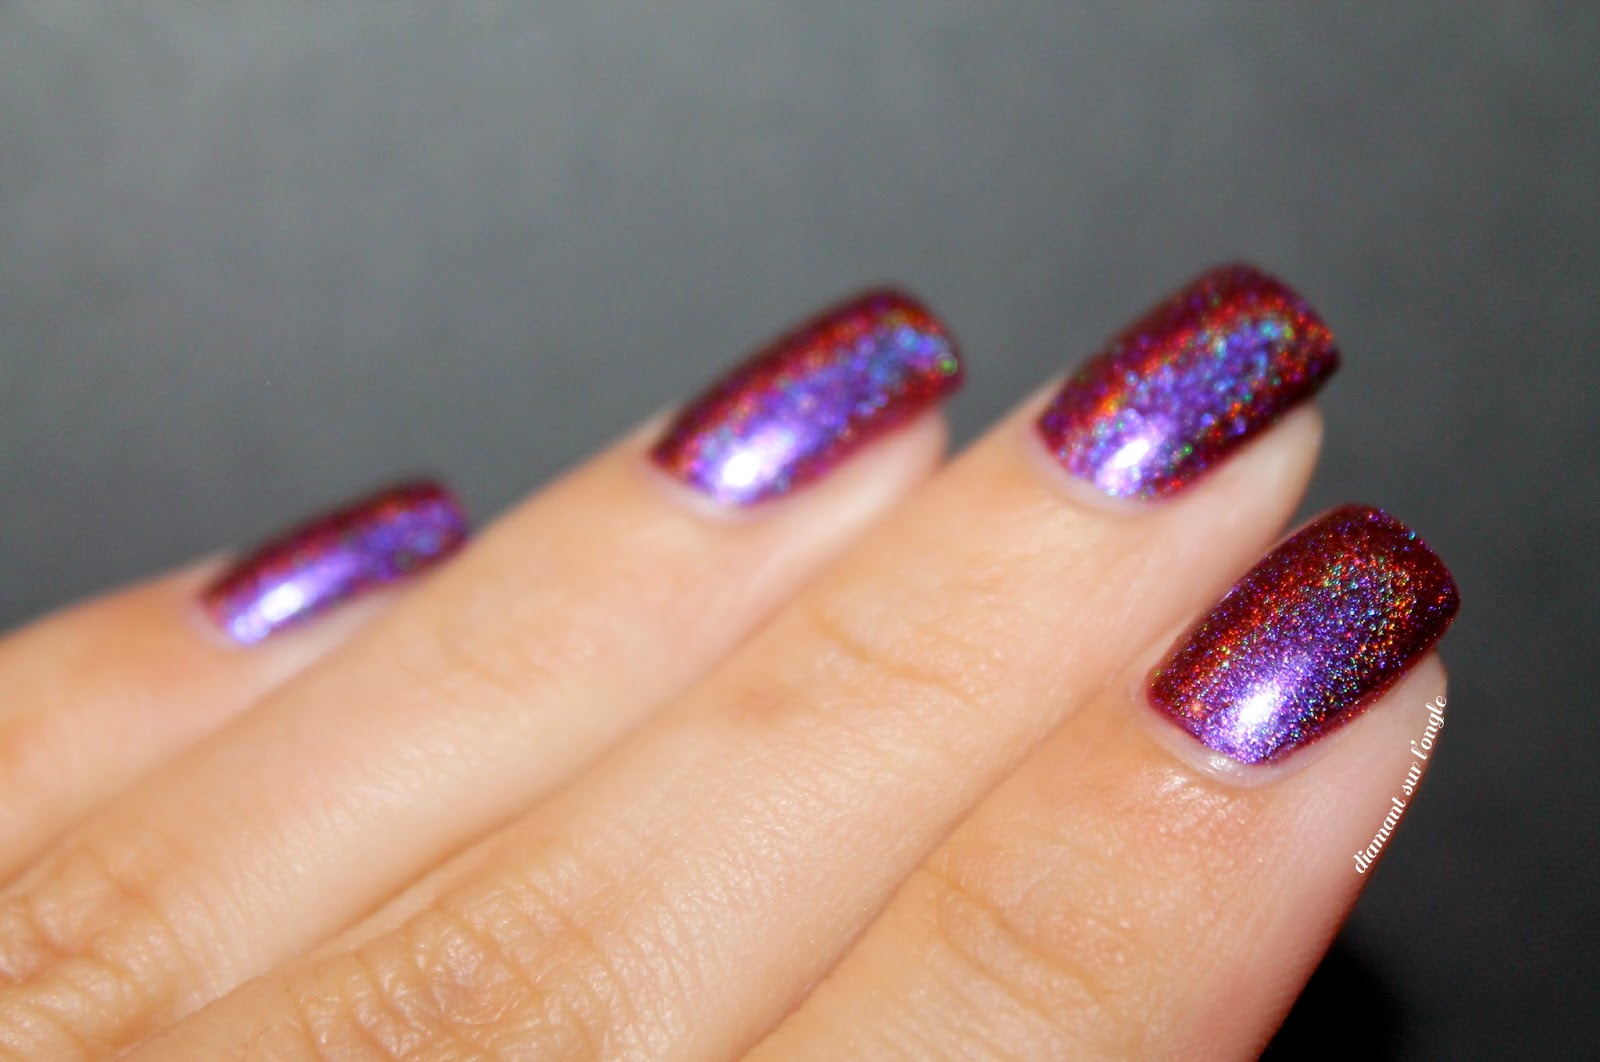 Swatch of June 2014 by Enchanted Polish